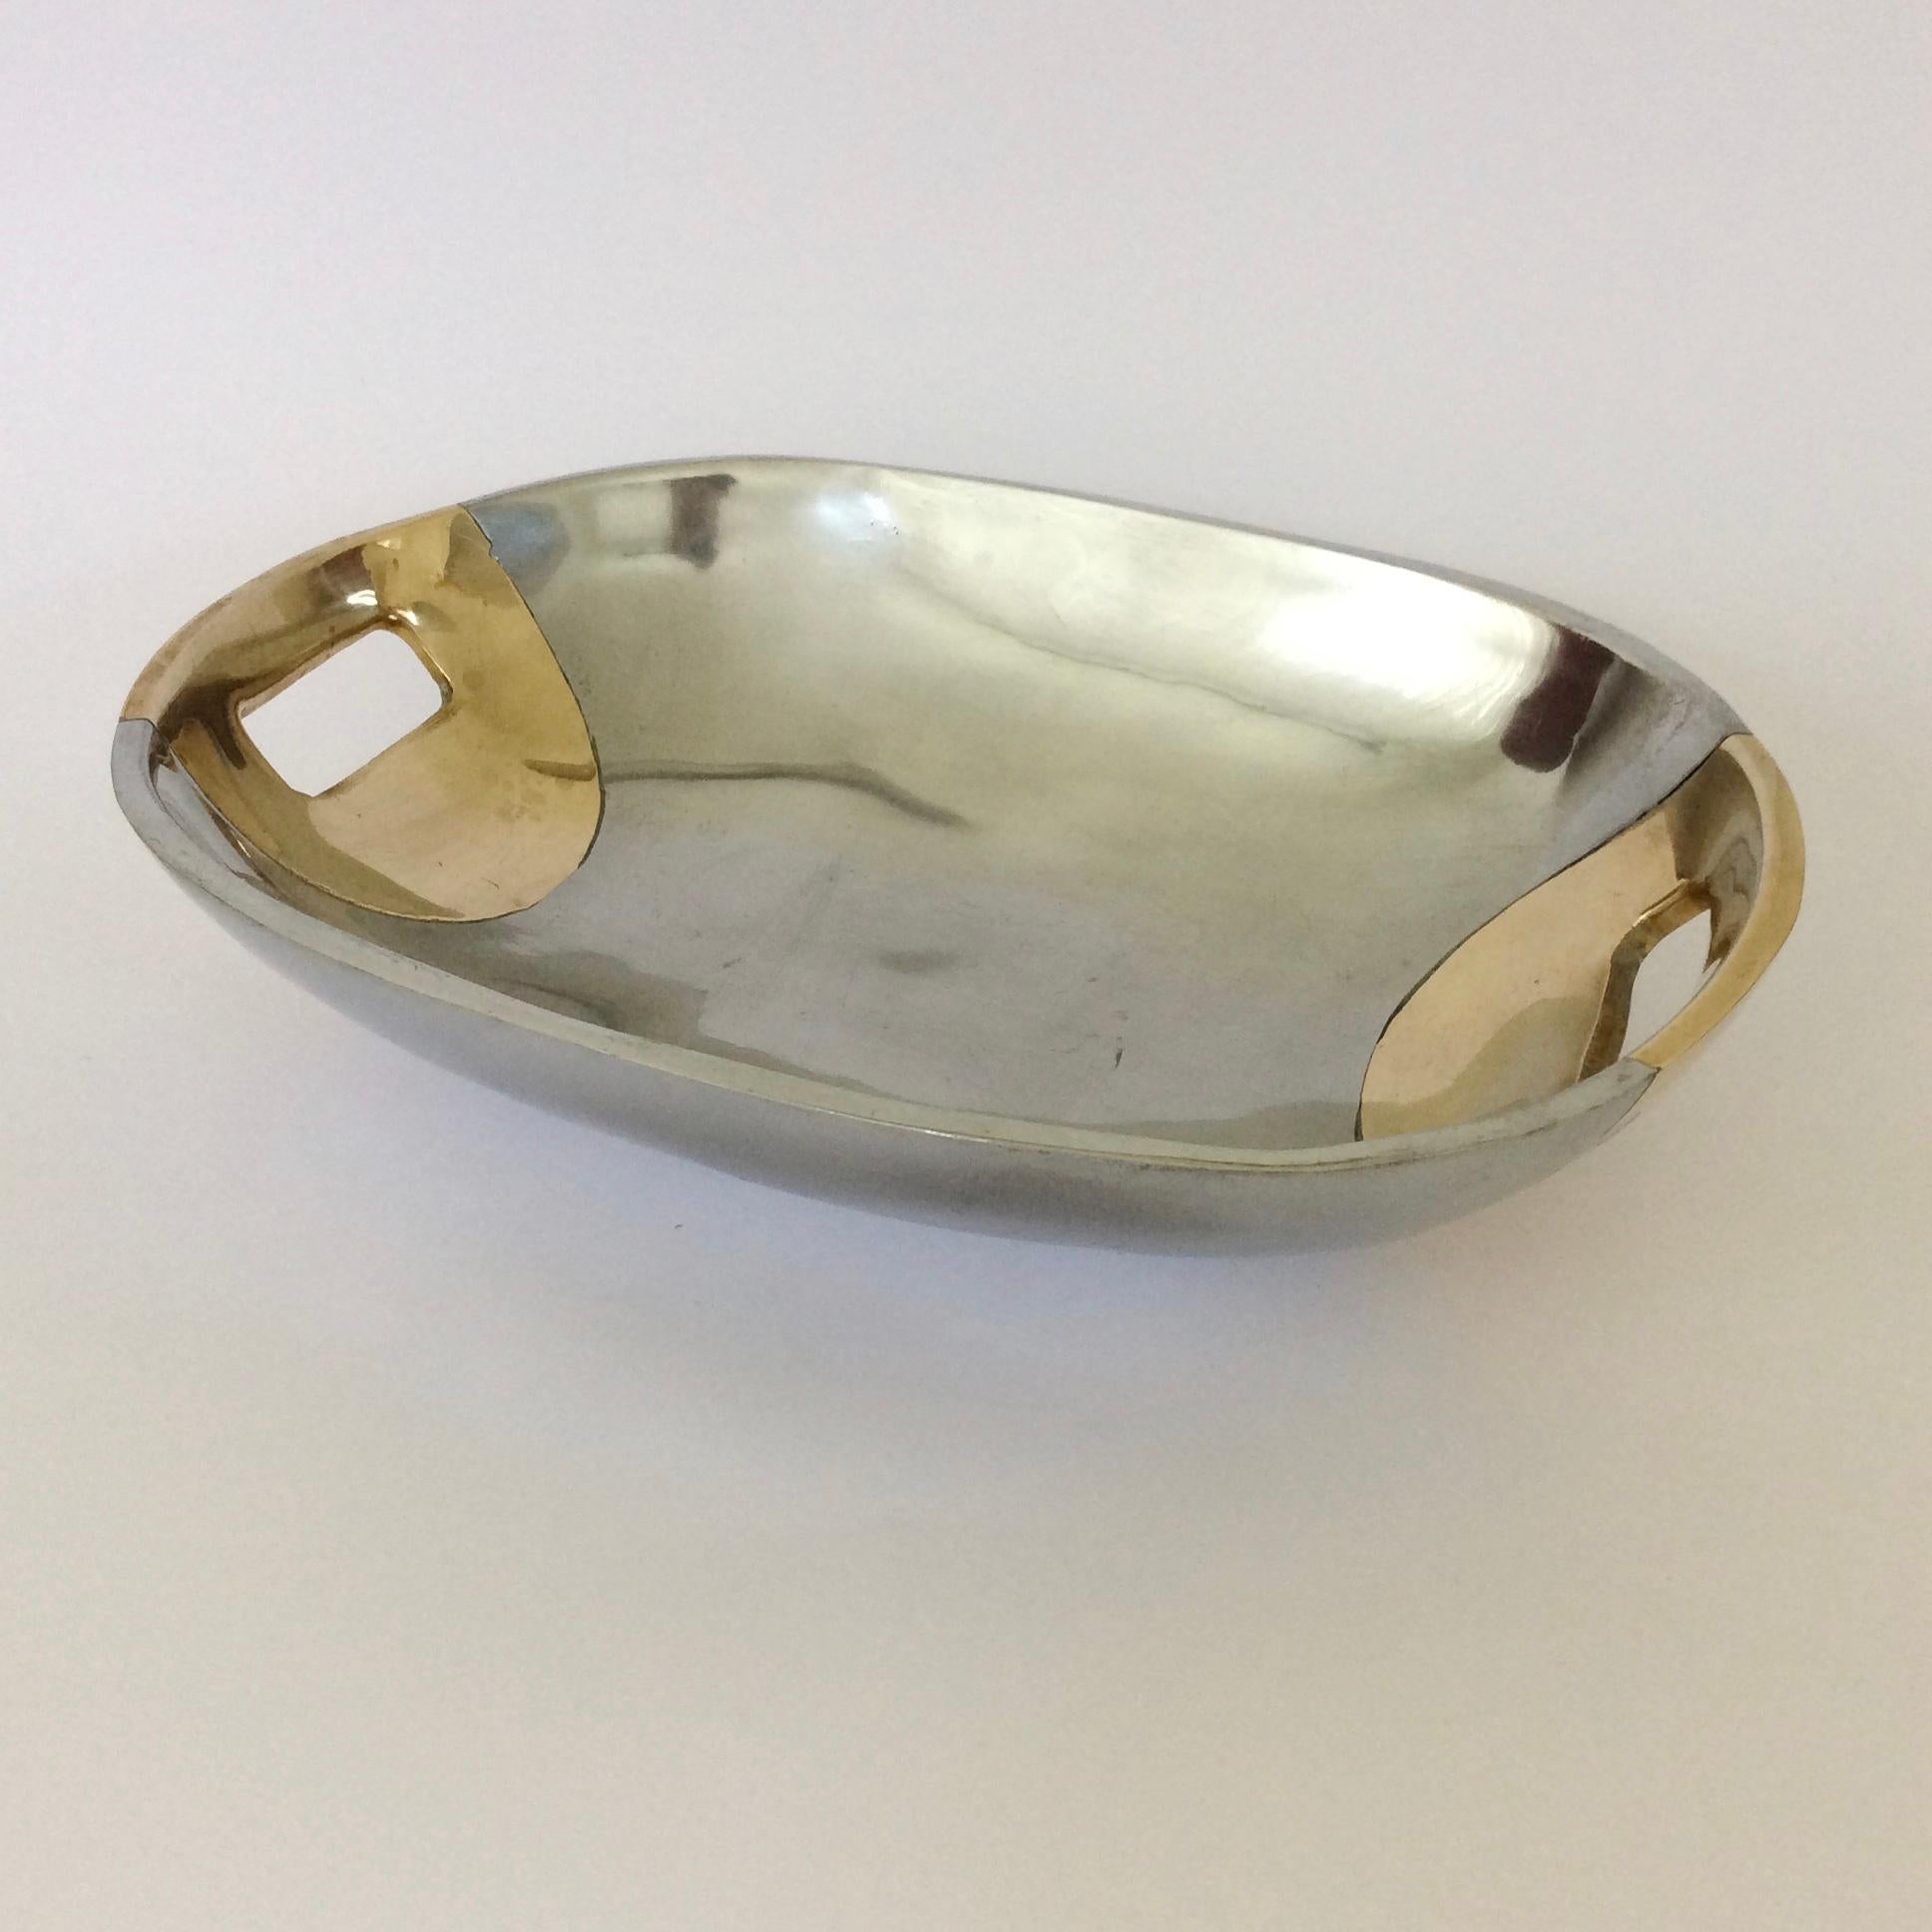 Nice David Marshall aluminium and brass tray or vide-poche, circa 1970, Spain.
Stamped underneath.
Dimensions: 25 cm W, 18 cm D, 6 cm H.
Good original condition.
We ship worldwide.
 